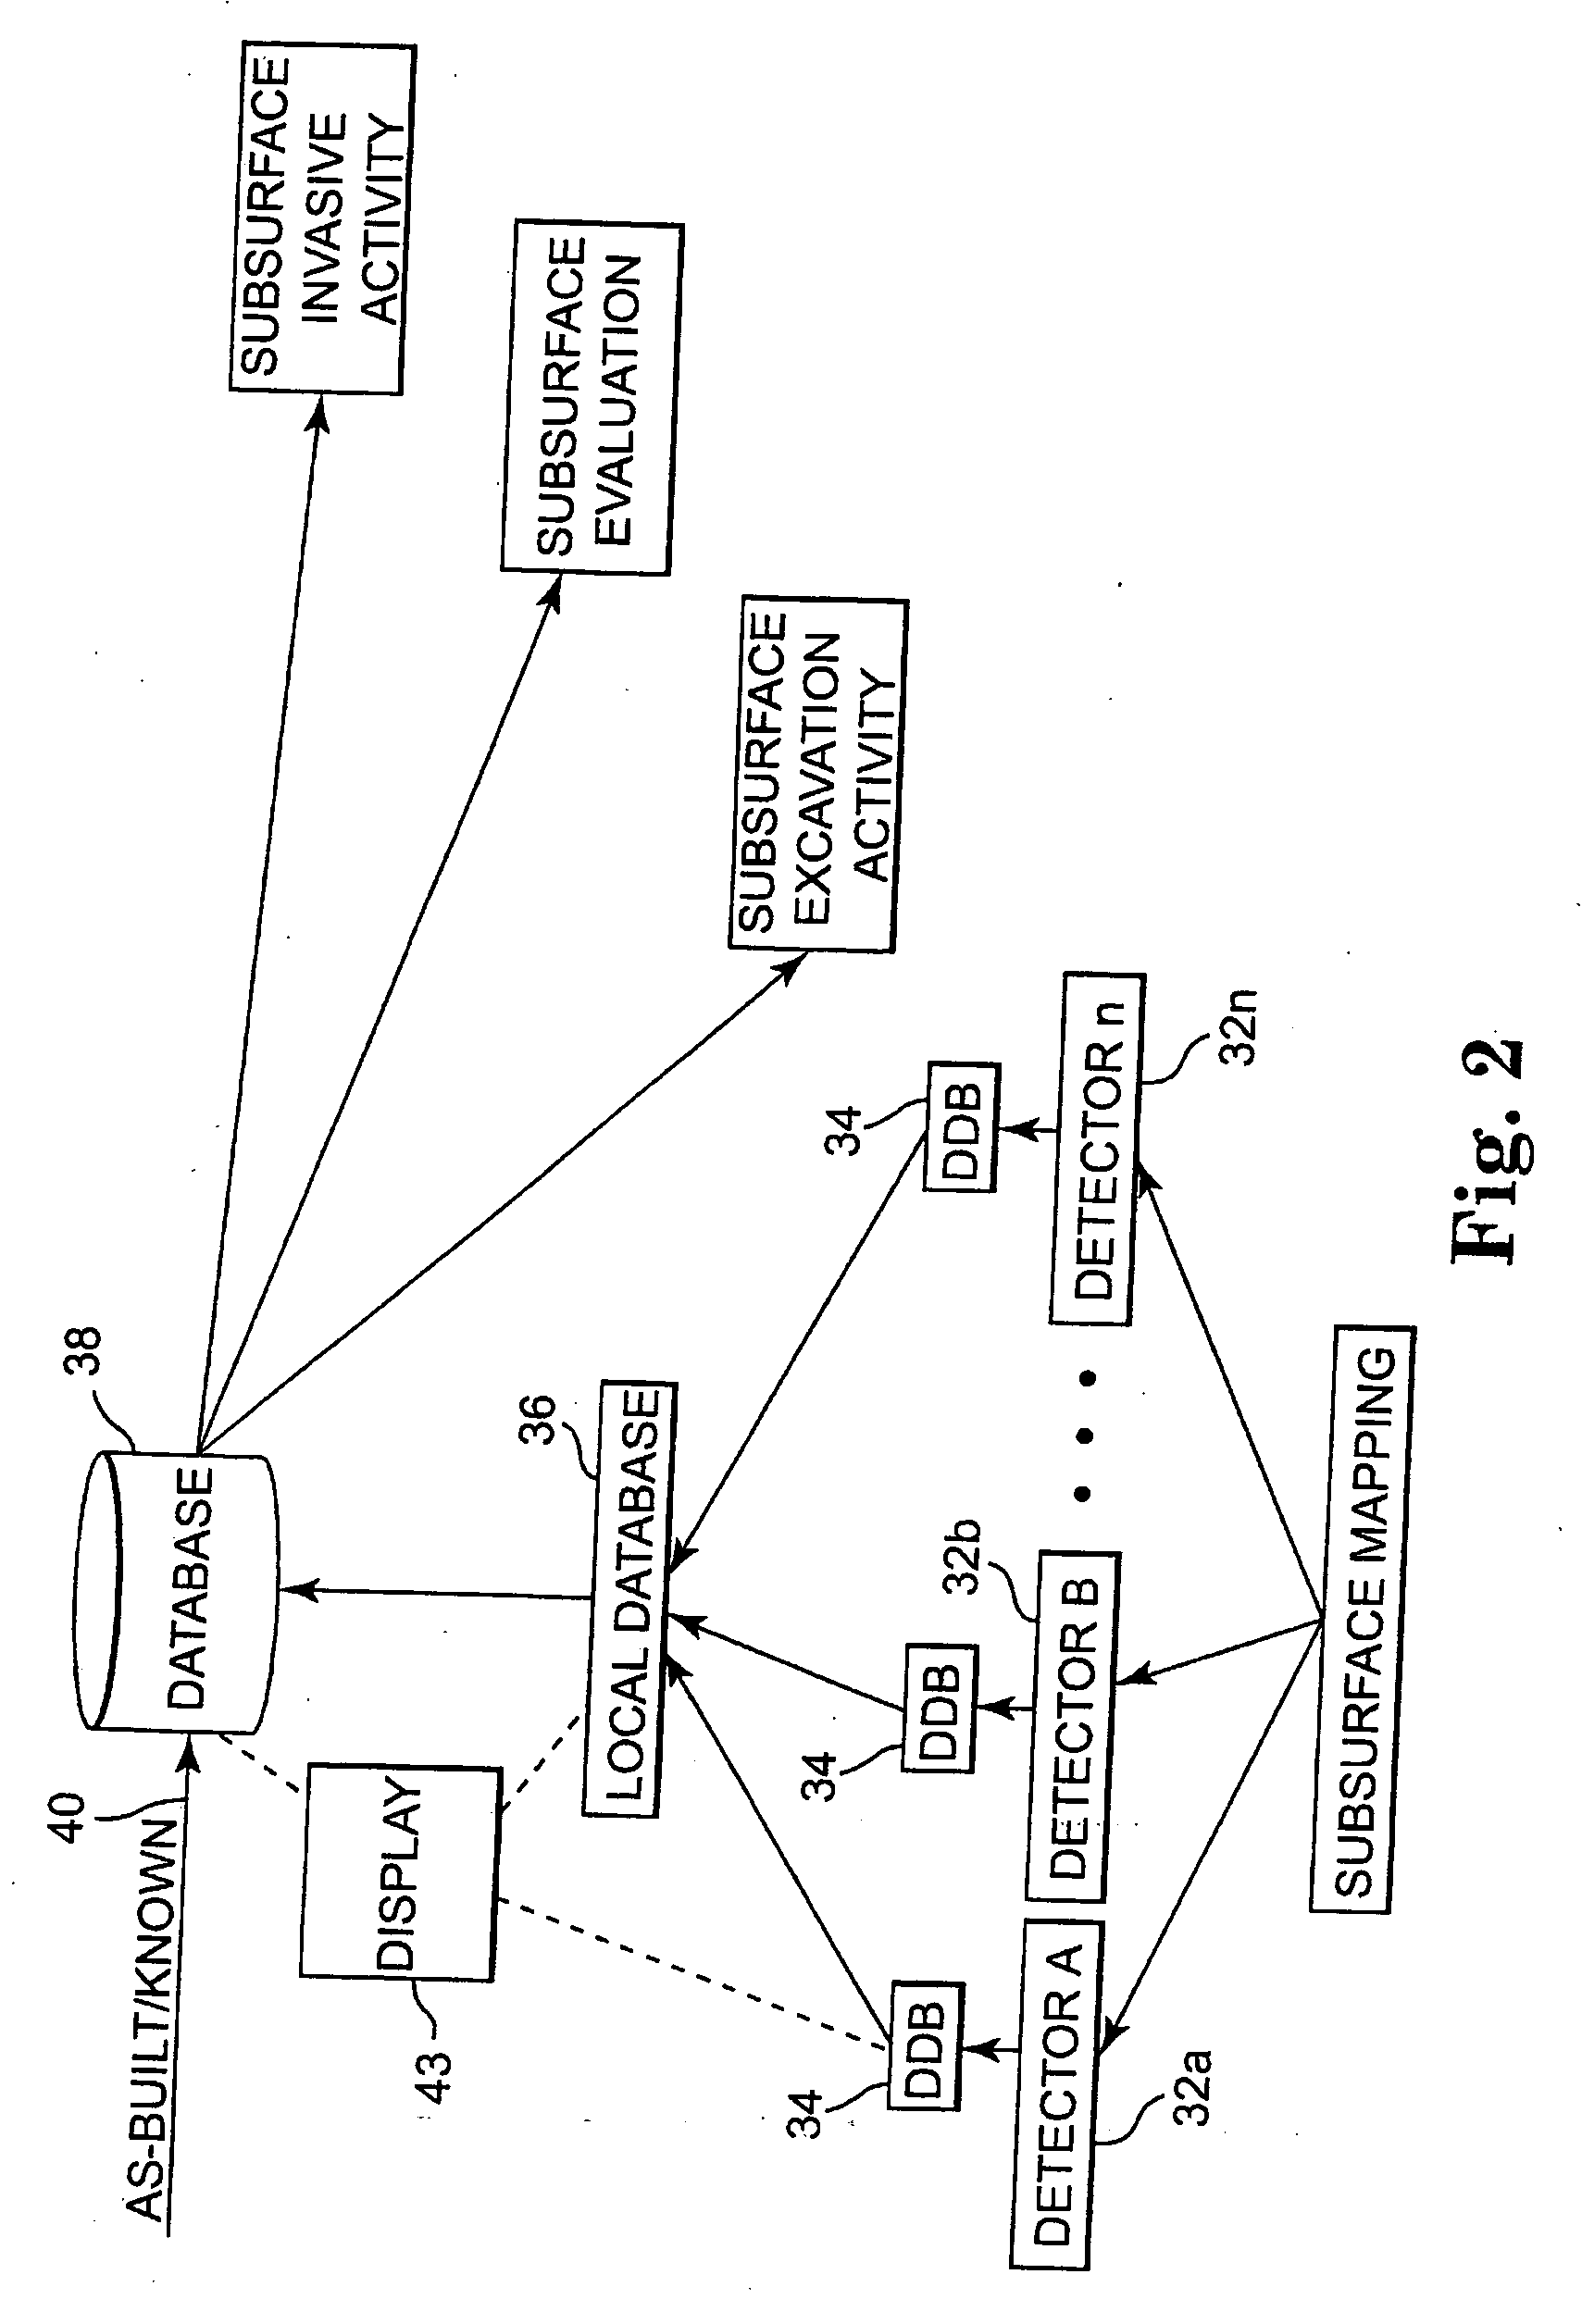 Utility mapping and data distribution system and method